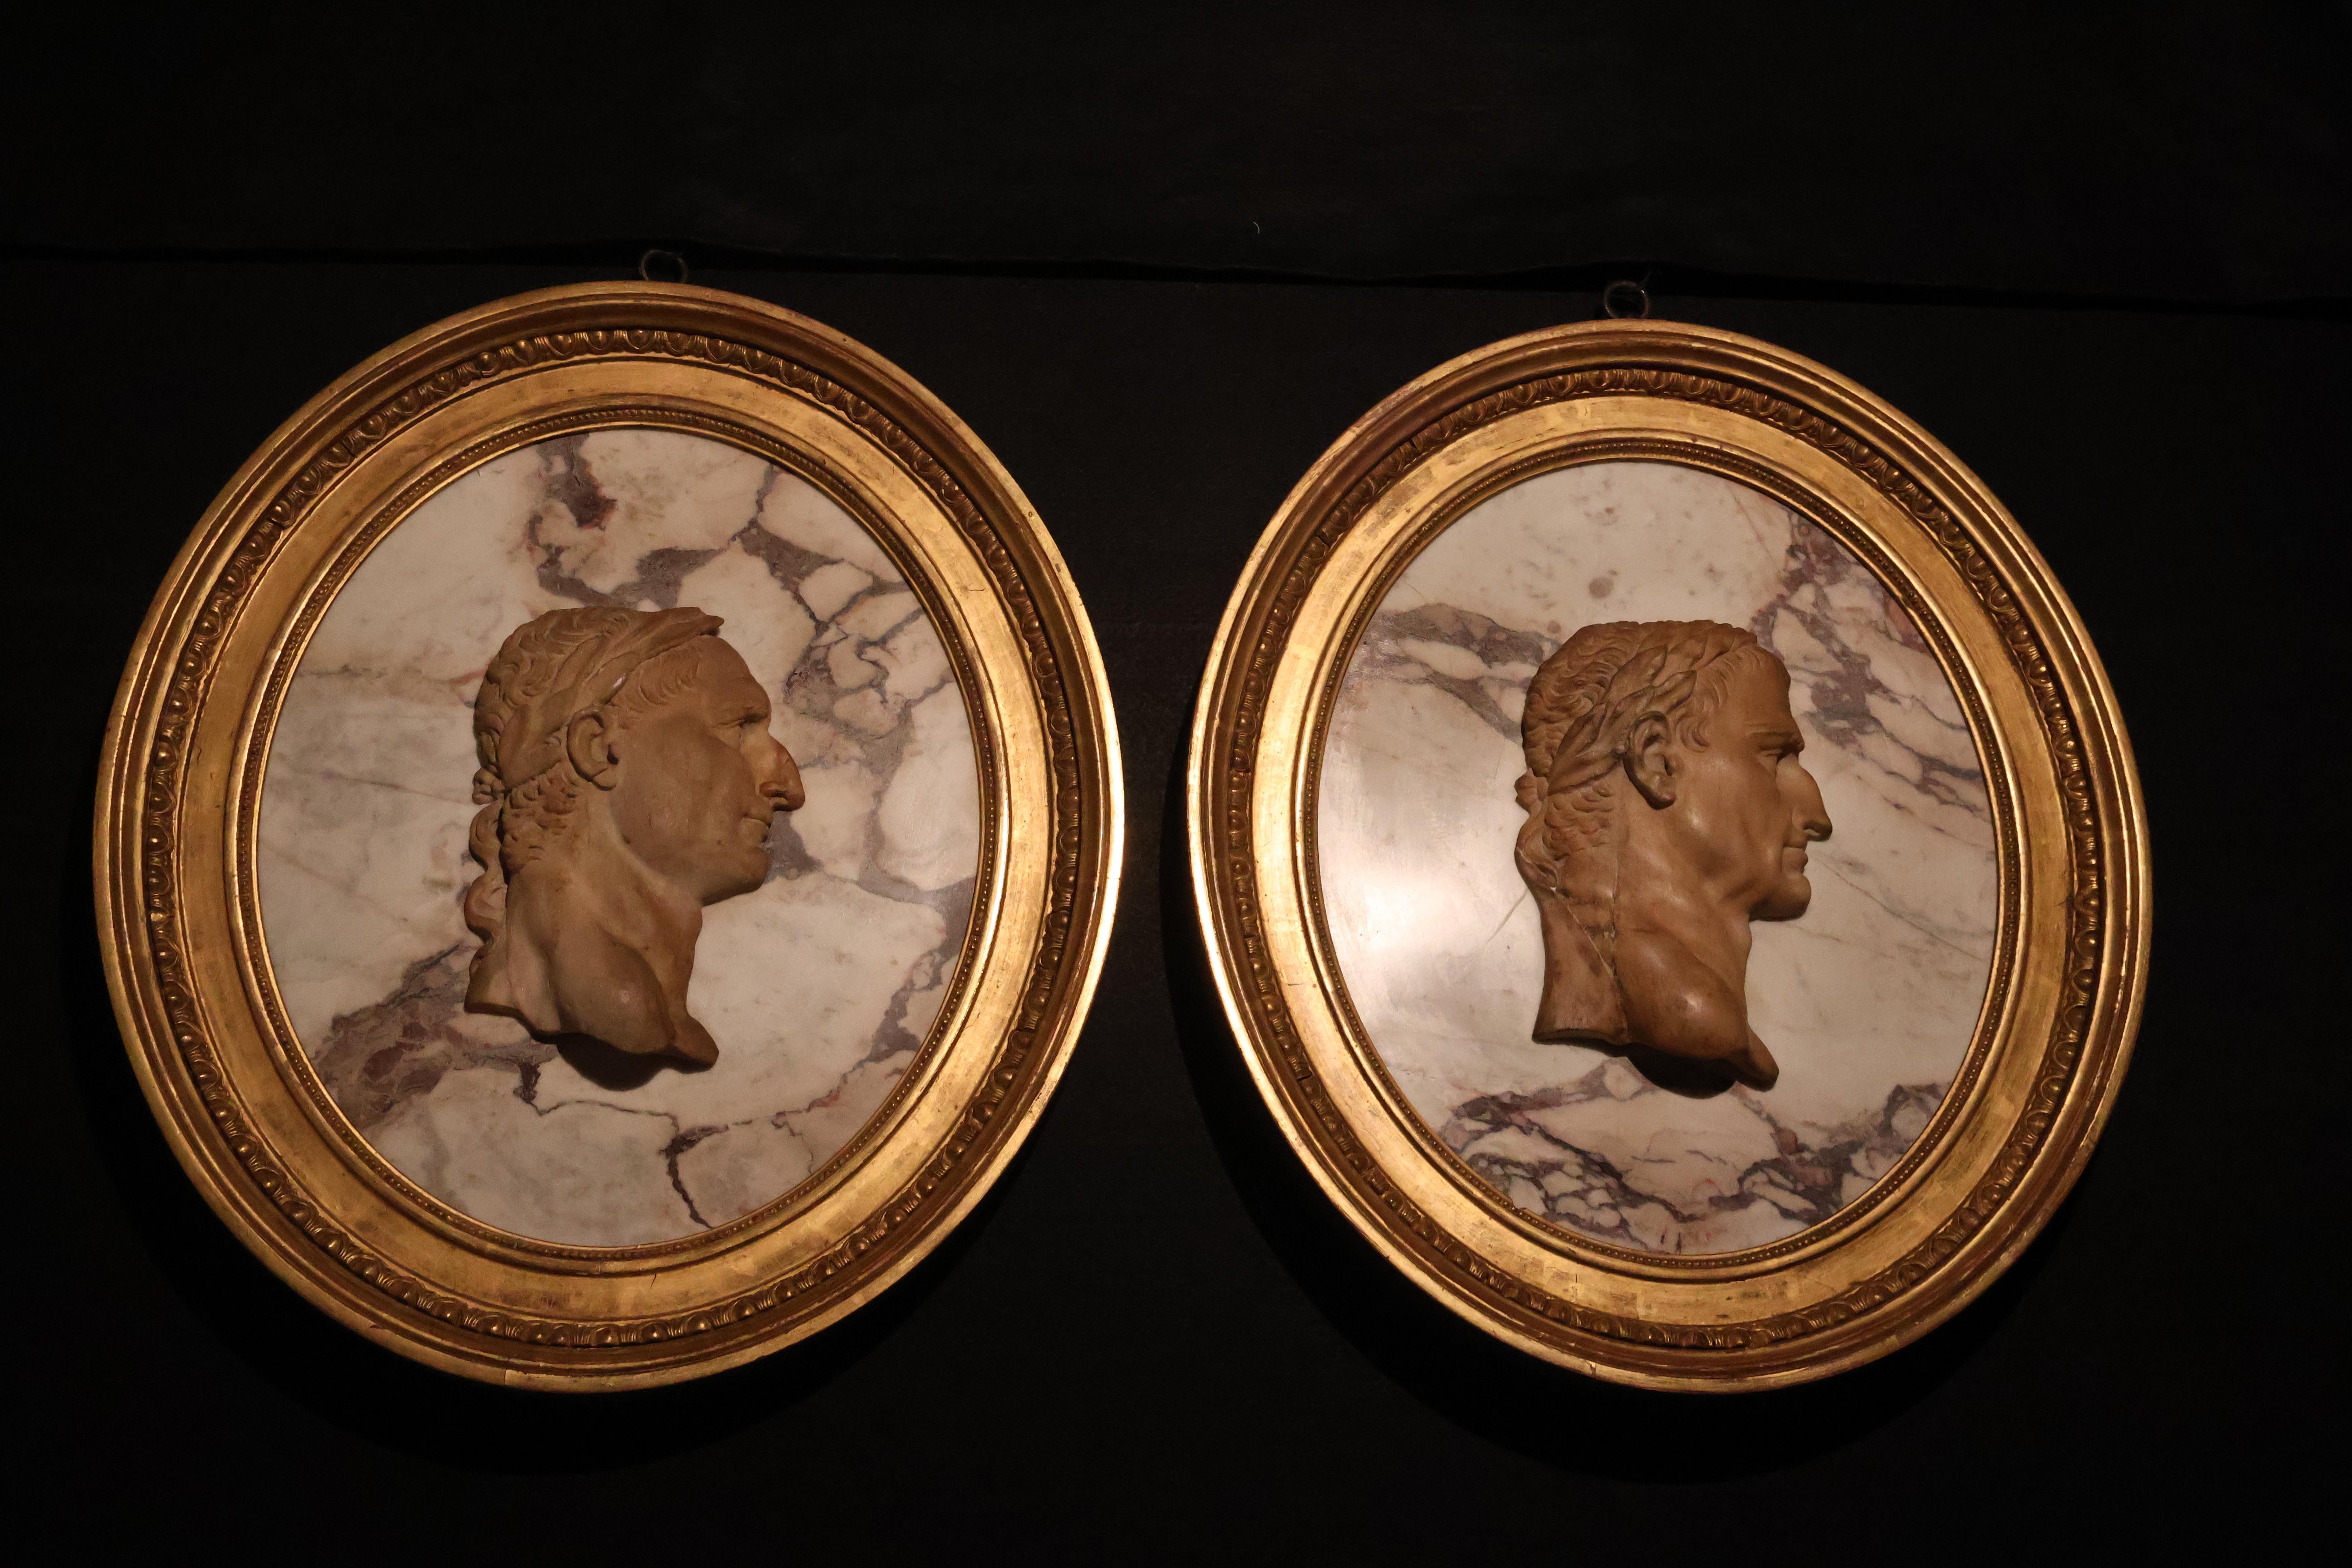 A Superb Pair of Breche Violette & Marble Cameos depicting Roman Emperors resting inside oval giltwood frame. France, circa 1860.
CW5028